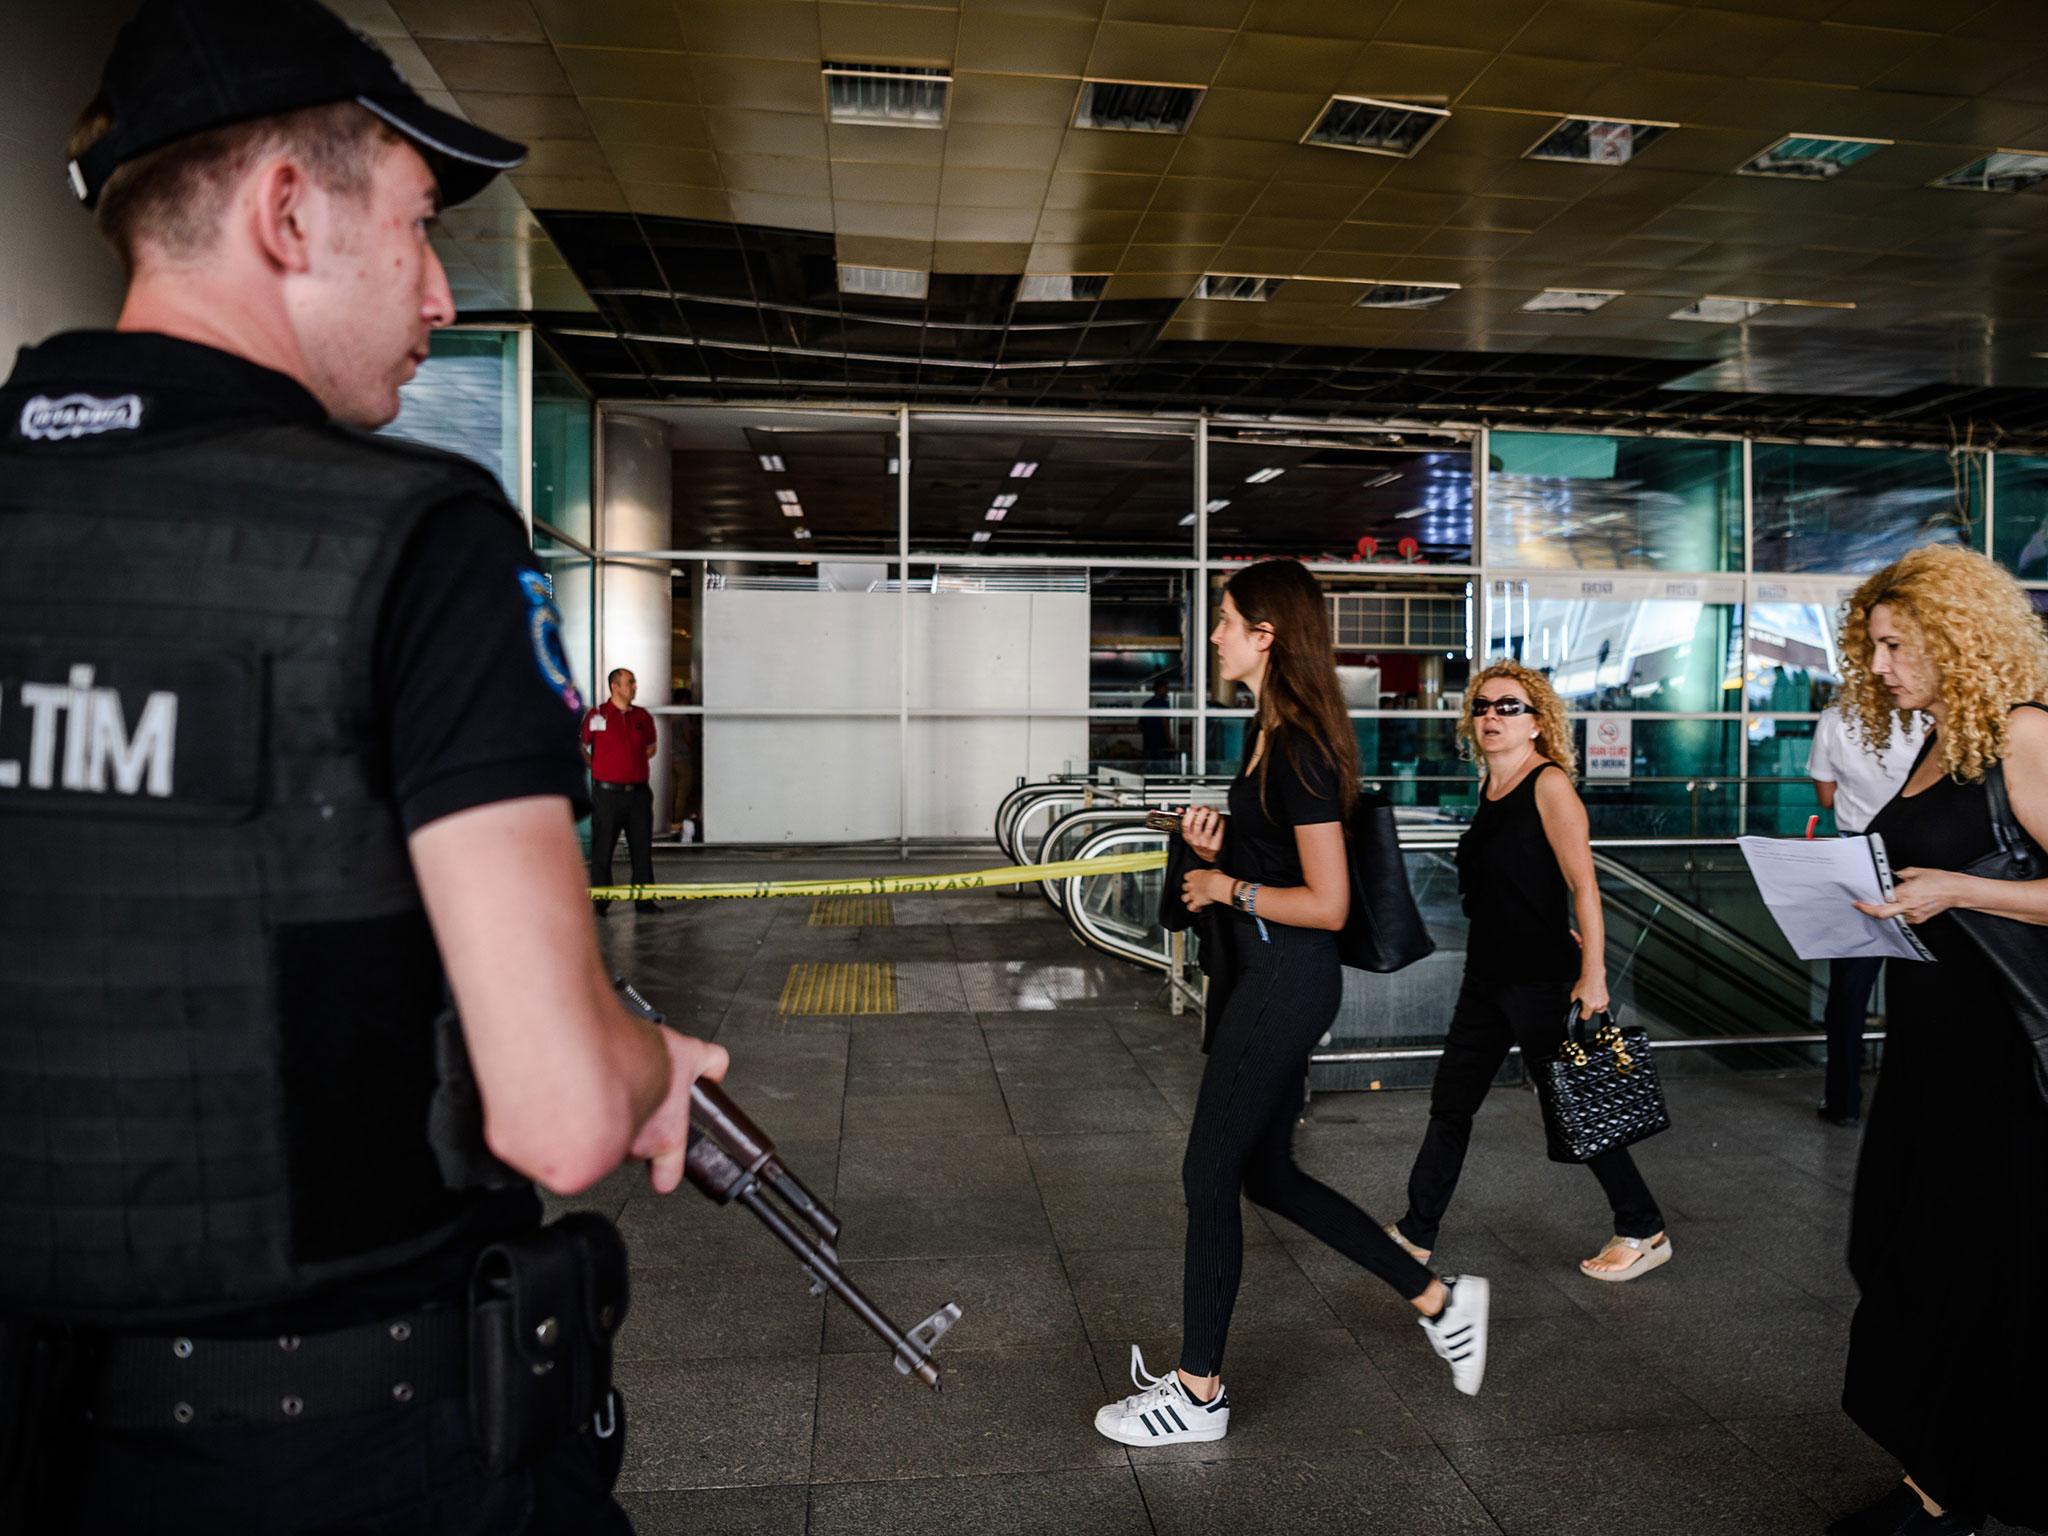 Istanbul's Ataturk airport after last week's attacks